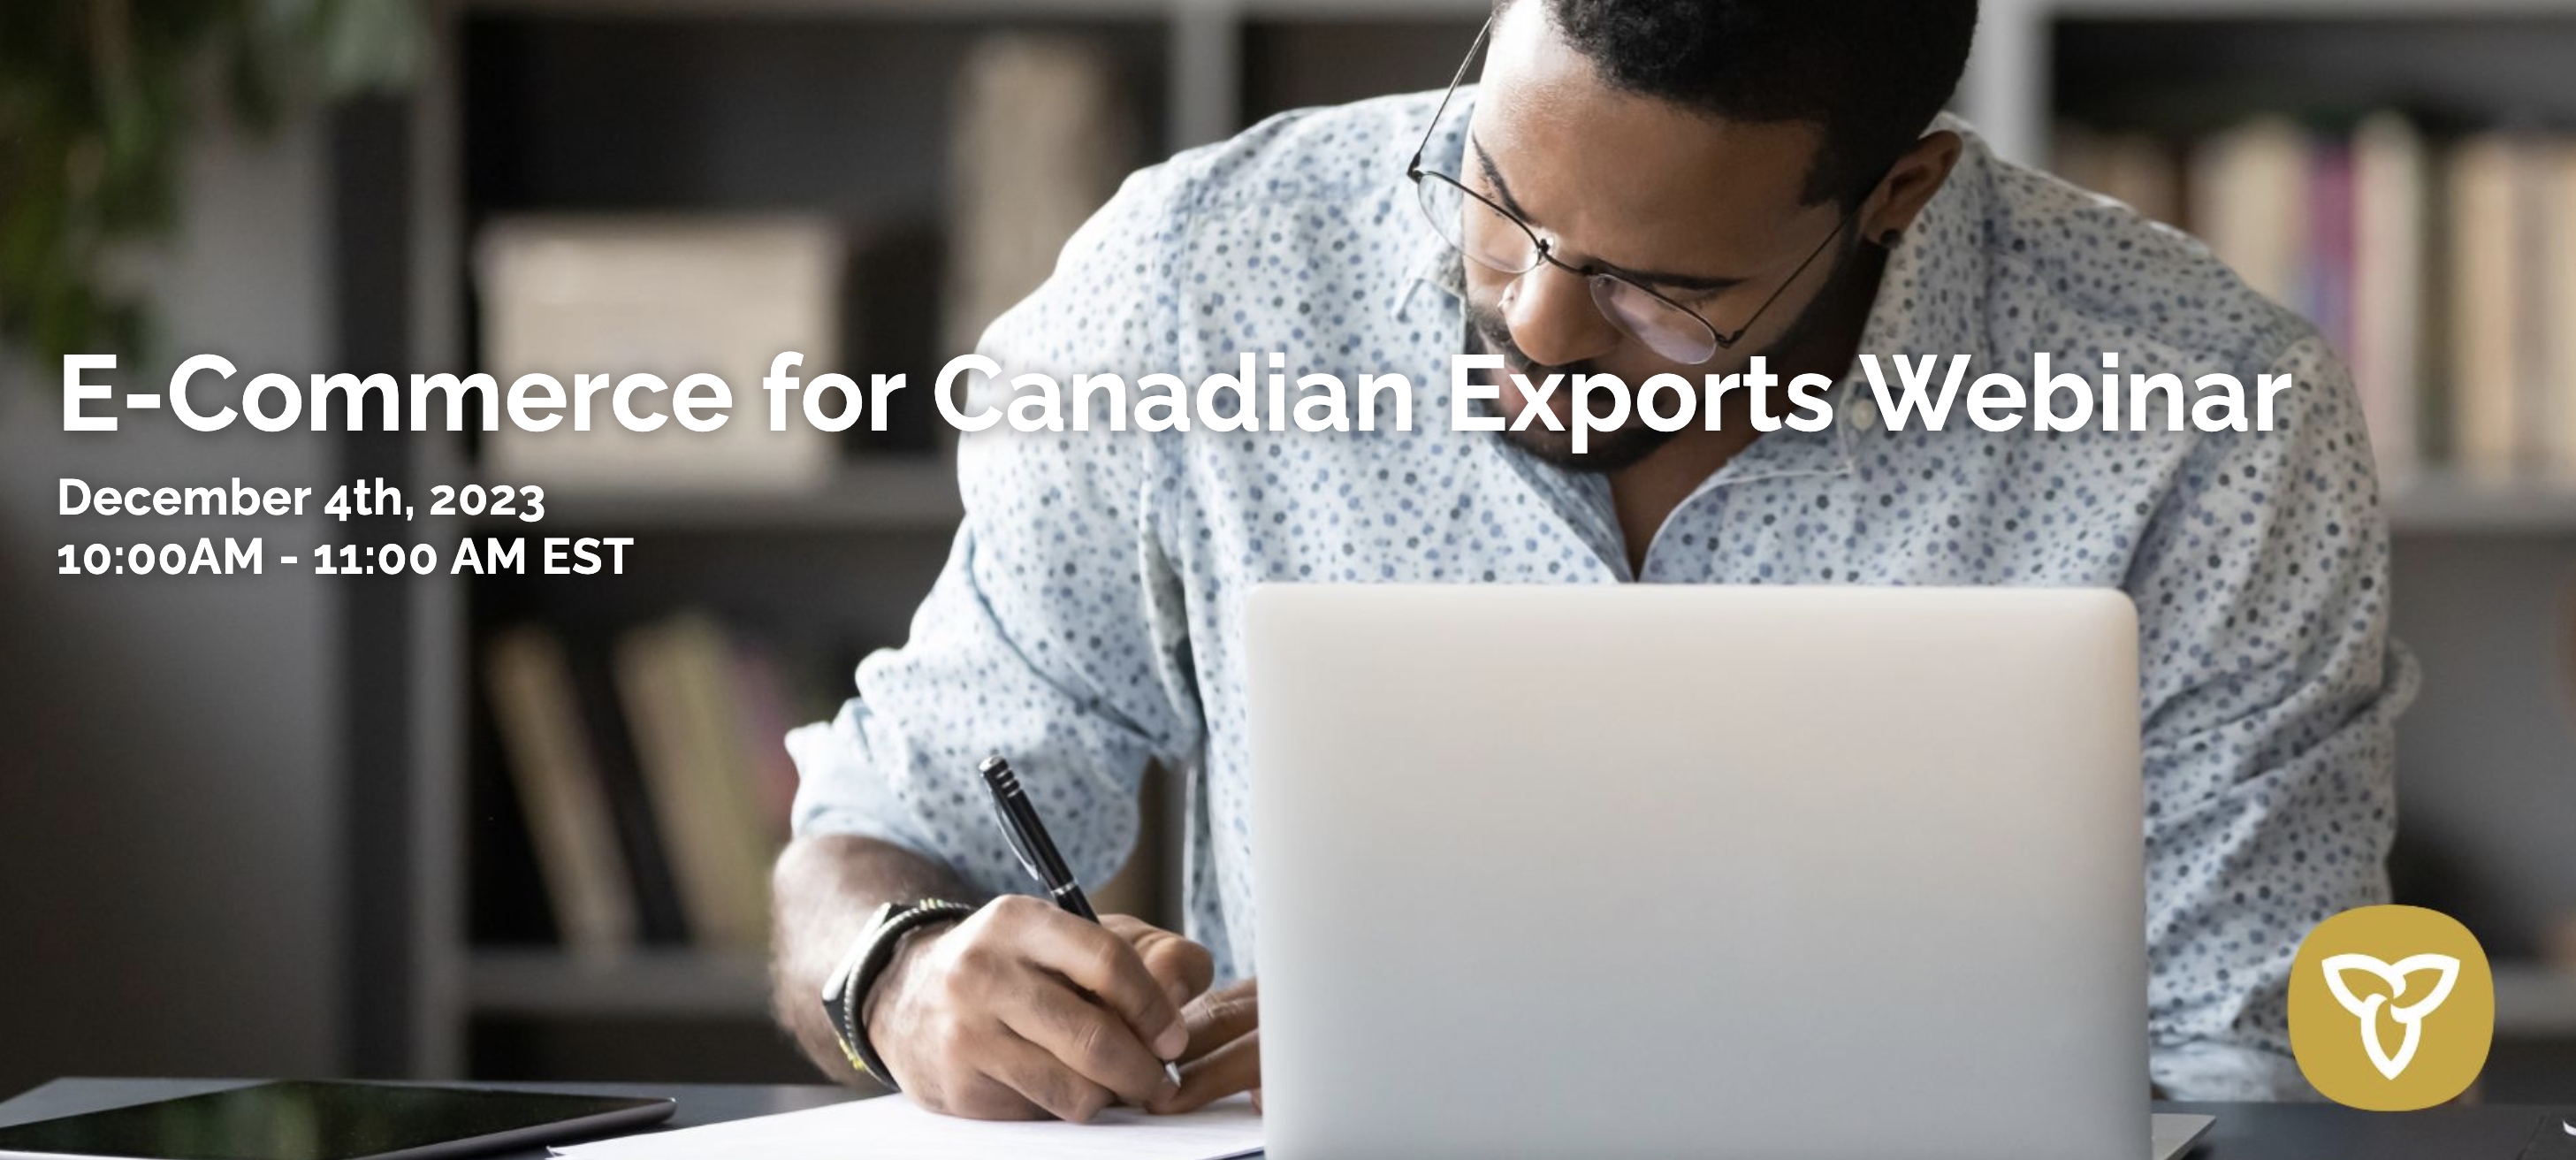 Ecommerce for Canadian Exports